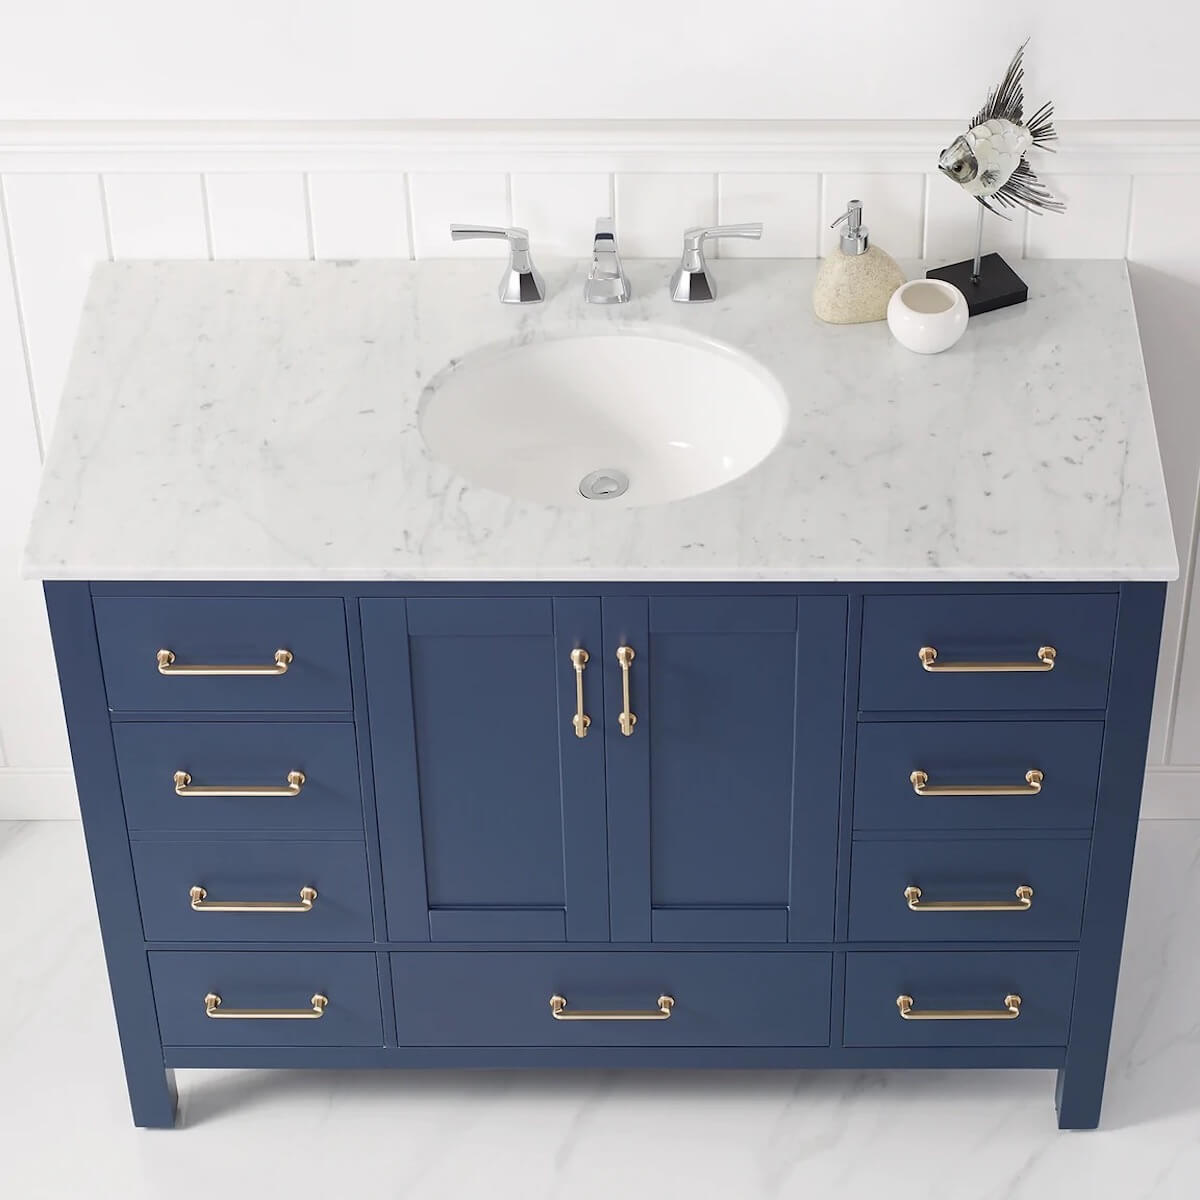 Vinnova 48” Gela Royal Blue Freestanding Single Vanity with Carrara White Marble Countertop Without Mirror Counter 723048-RB-CA-NM